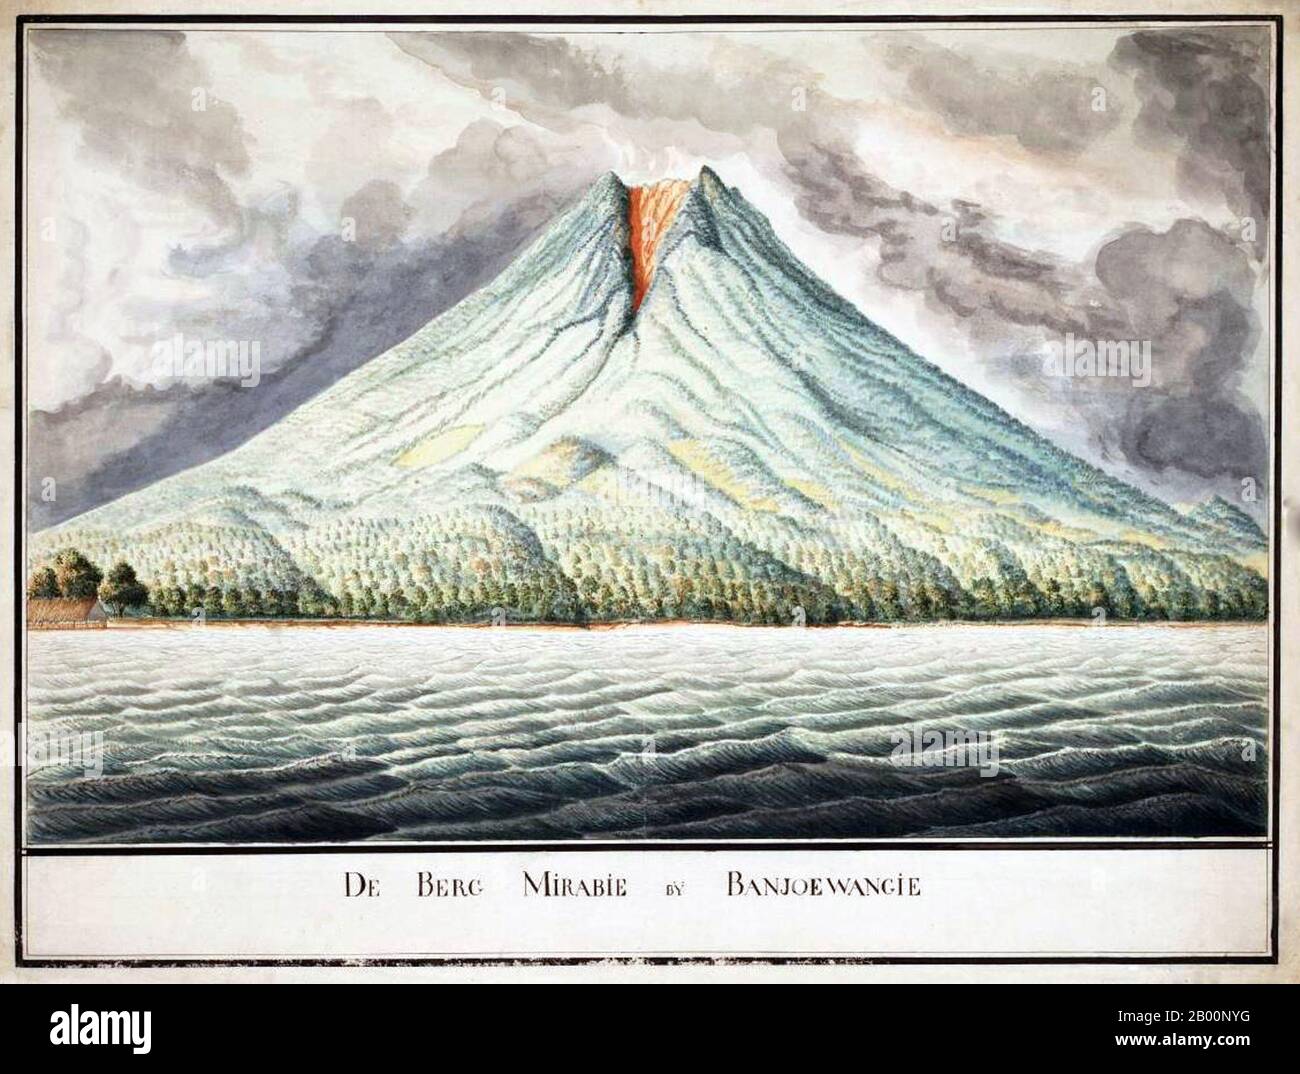 Indonesia: Mount Mirabie in Banyuwangi, eastern Java. Watercolour painting by an unknown artist, late 18th century.  Mount Merapi, Gunung Merapi (literally Fire Mountain in Indonesian/Javanese), is an active stratovolcano located on the border between Central Java and Yogyakarta, Indonesia. It is the most active volcano in Indonesia and has erupted regularly since 1548. It is located approximately 28 km north of Yogyakarta city, and thousands of people live on the flanks of the volcano, with villages as high as 1,700 metres (5,600 ft) above sea level. Stock Photo